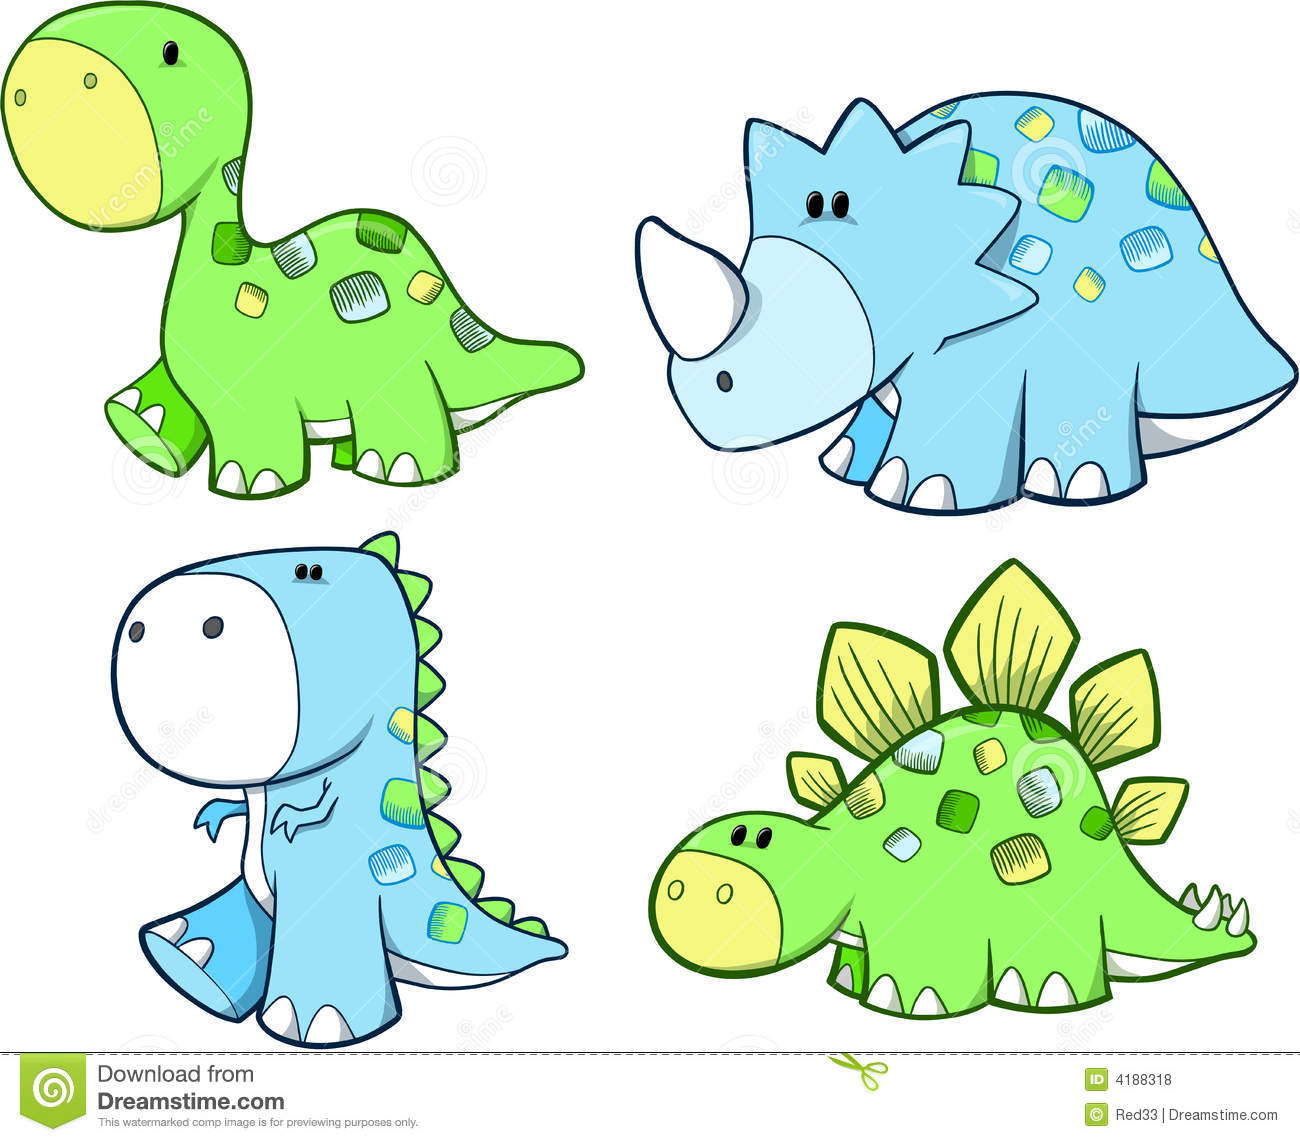 Cute Dinosaur Images   HD Wallpapers Lovely